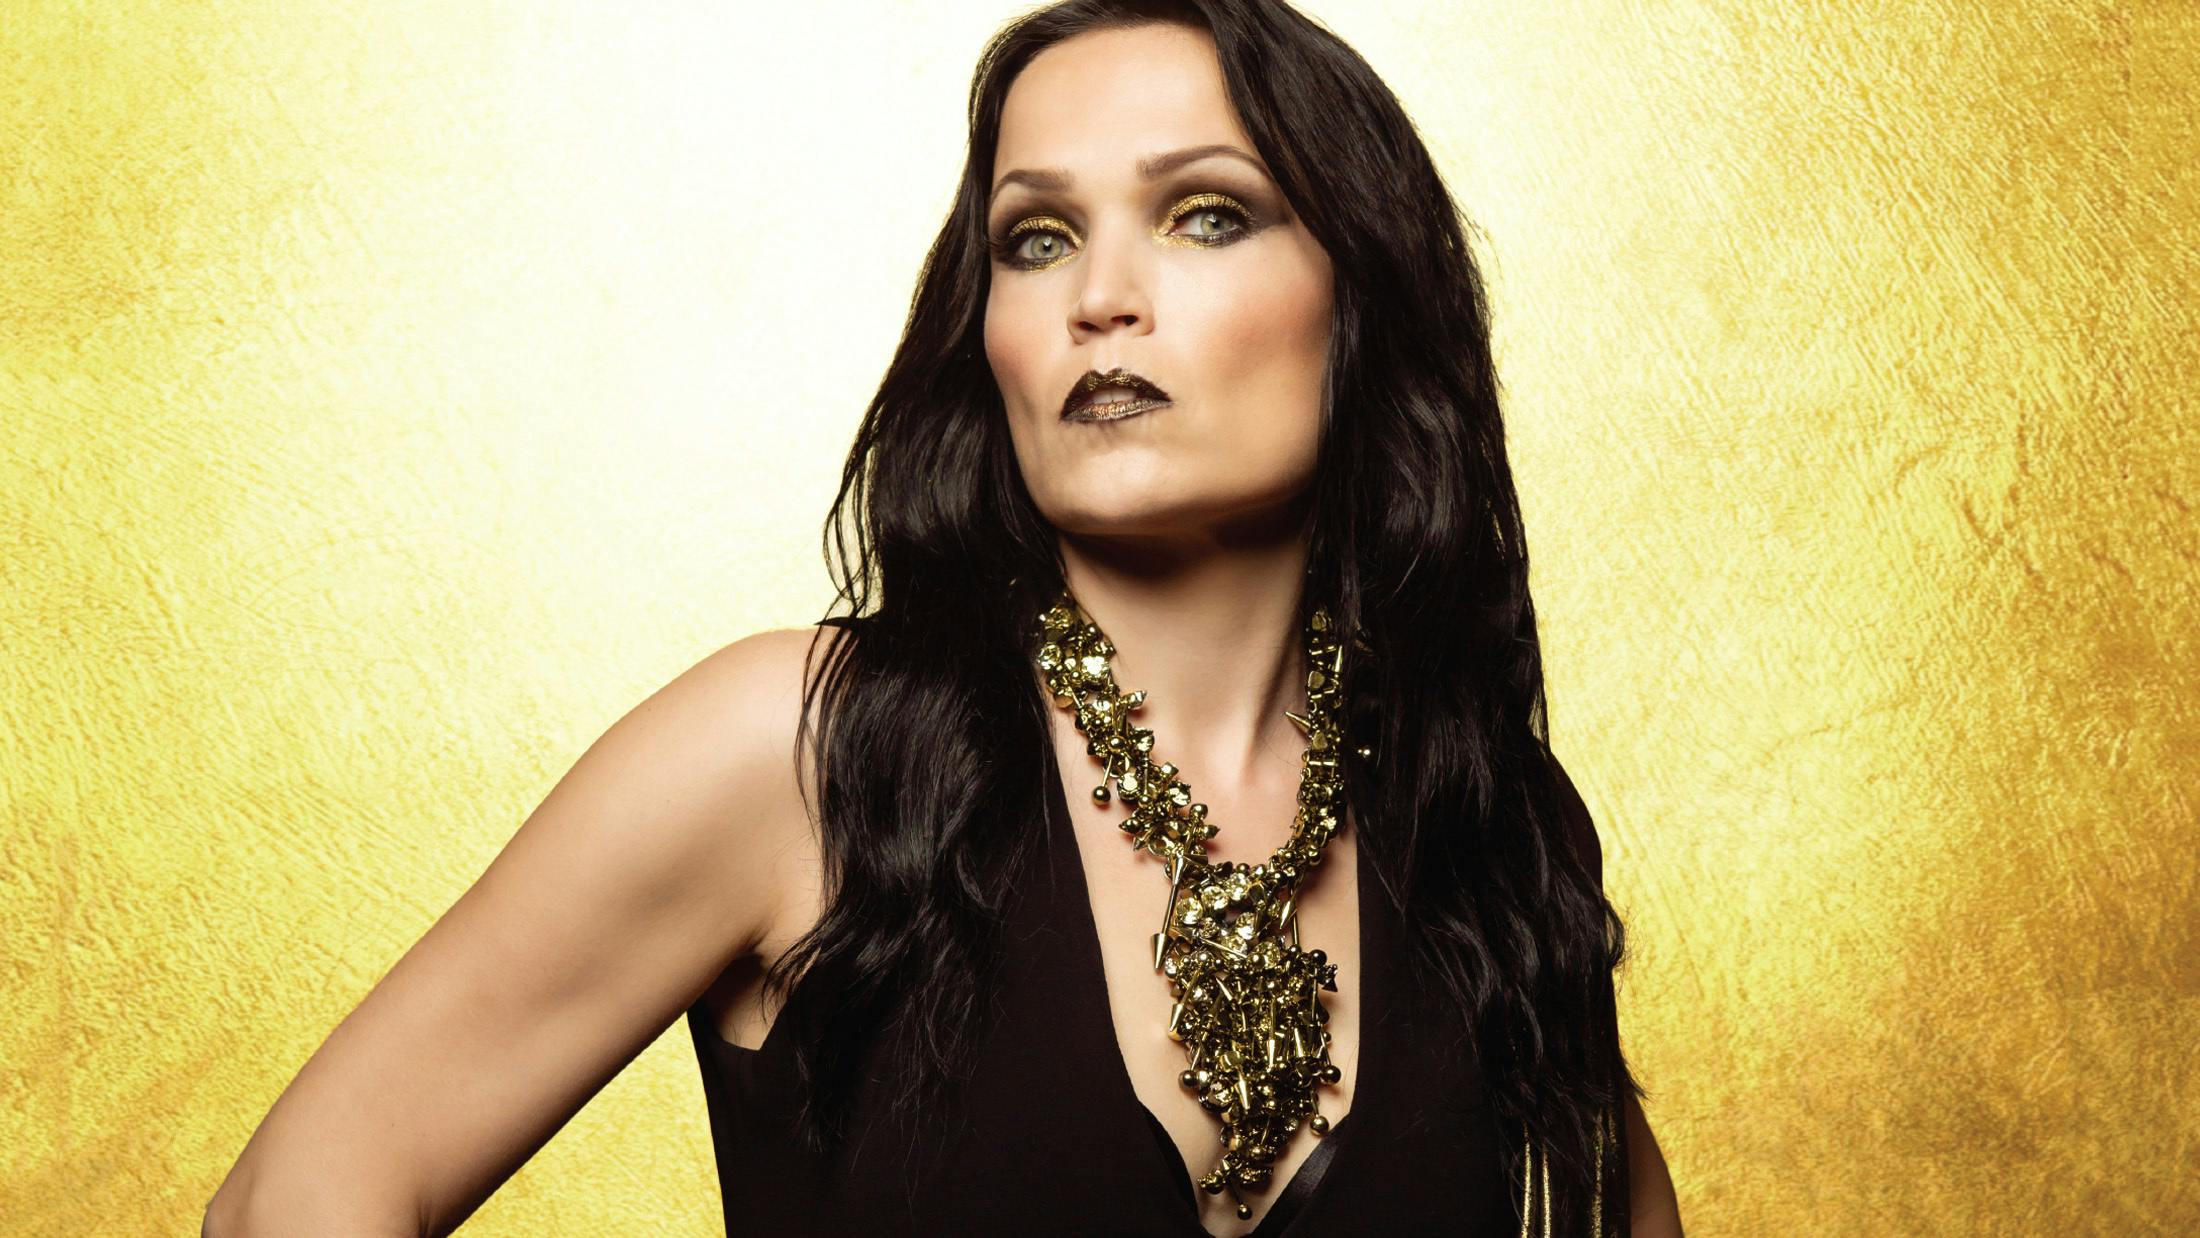 Tarja Turunen: "My Biggest Blessing, My Voice, Has Also At Times Been A Curse"